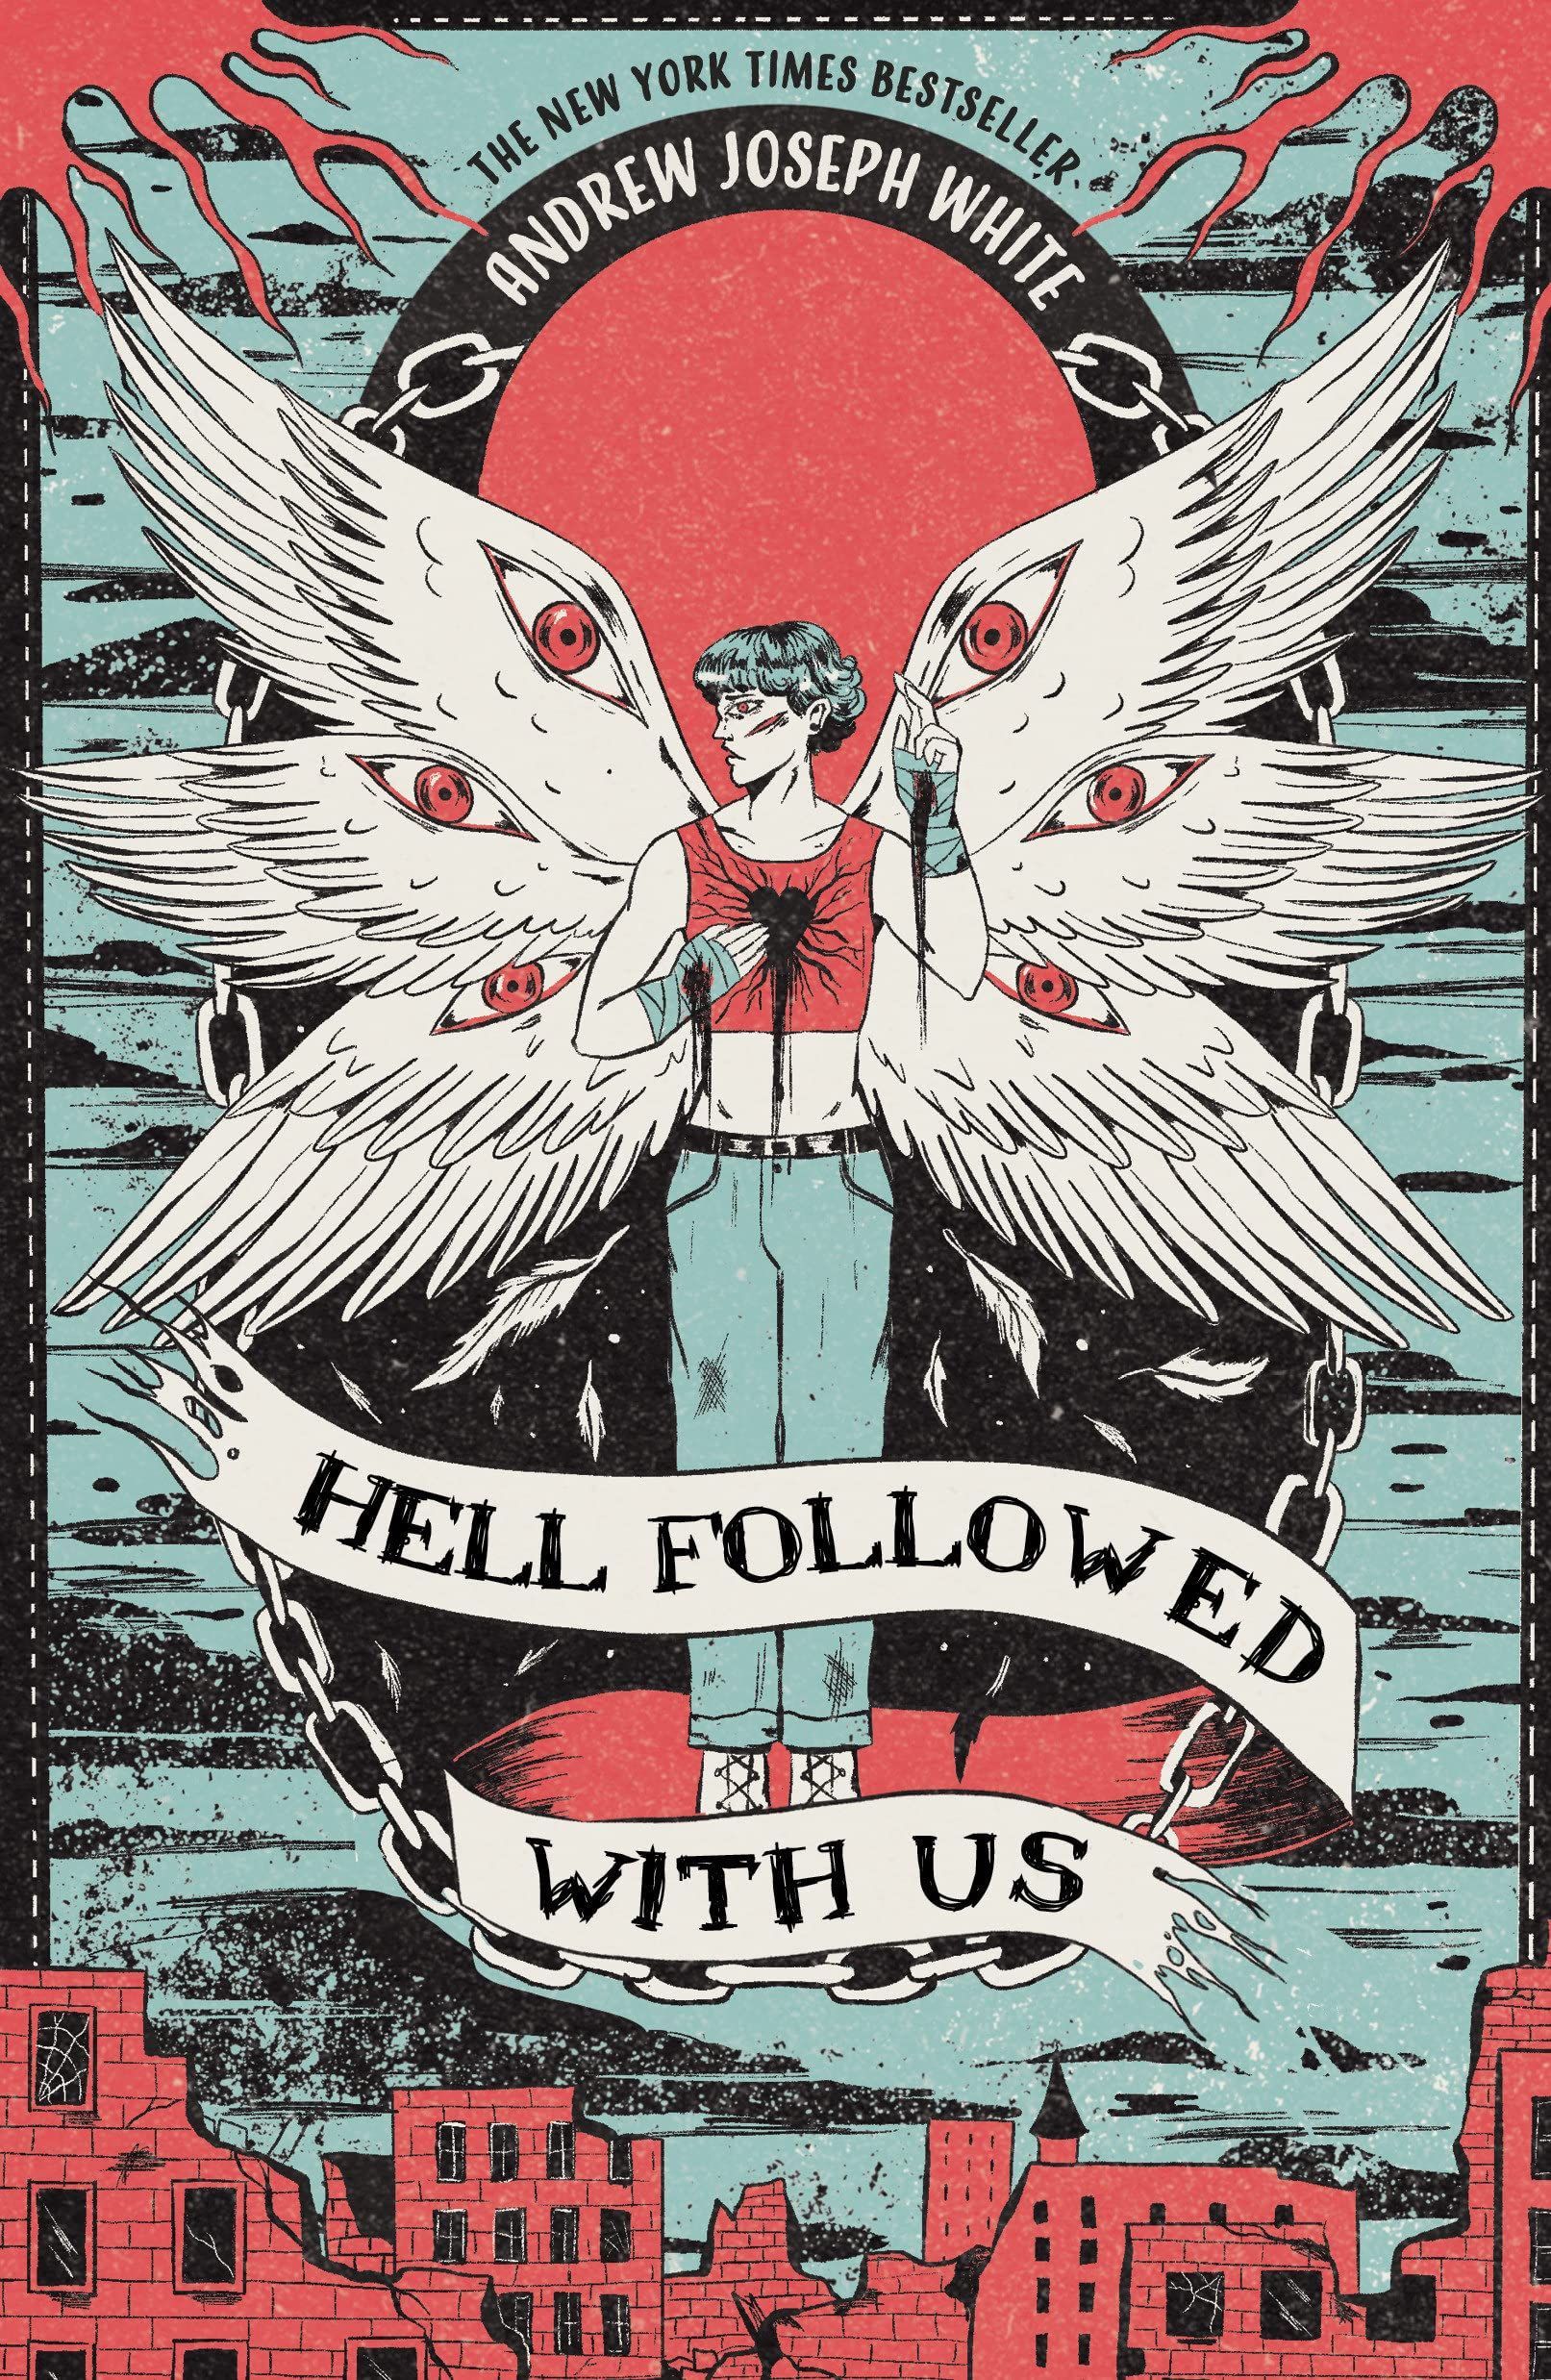 That Monster Which Prevaileth: On Andrew Joseph White’s “Hell Followed with Us”